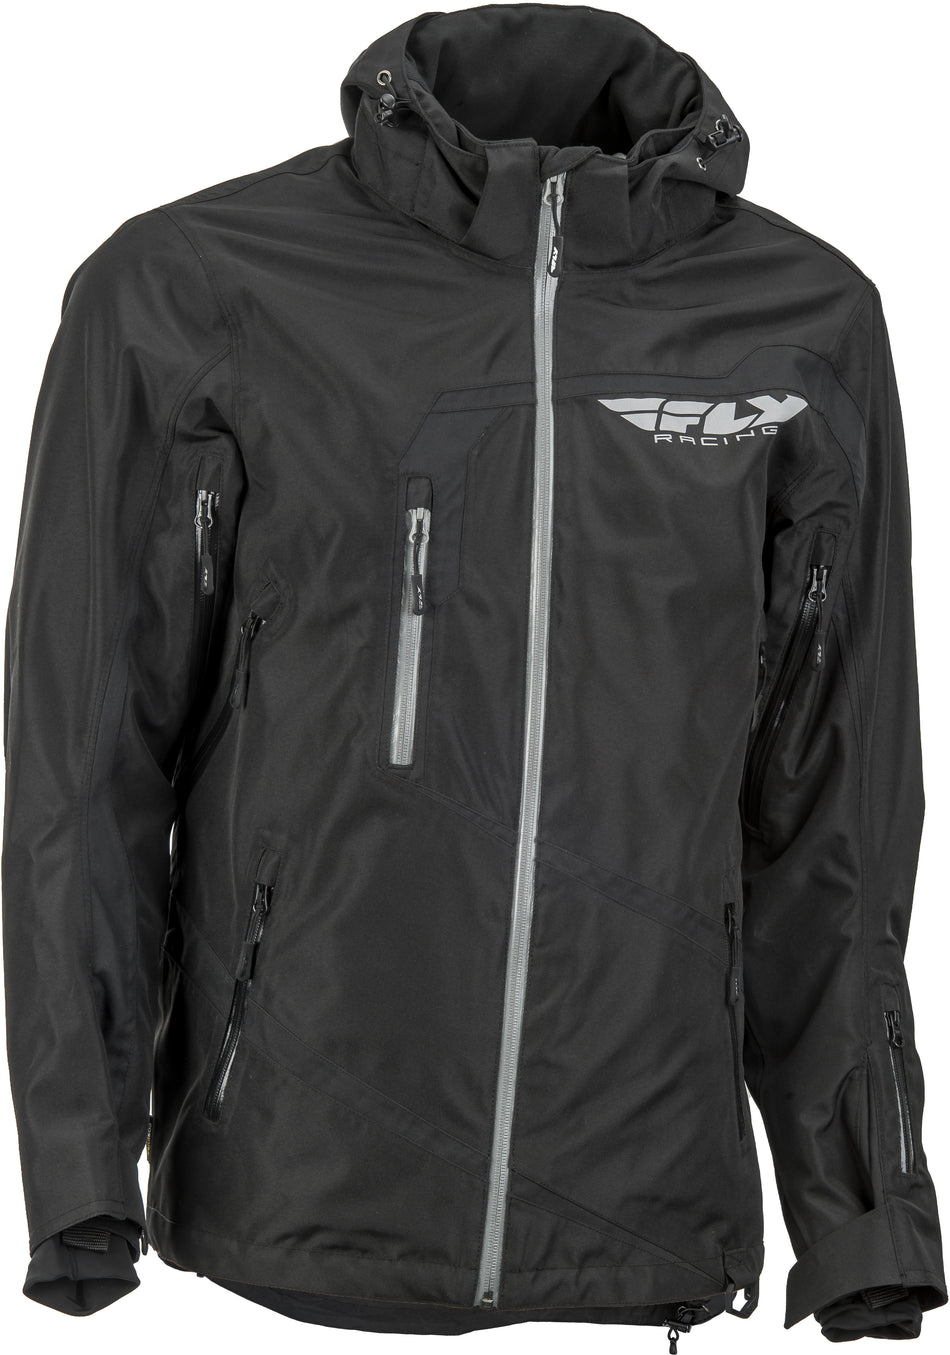 FLY RACING Fly Carbon Jacket Black Sm 470-4040S